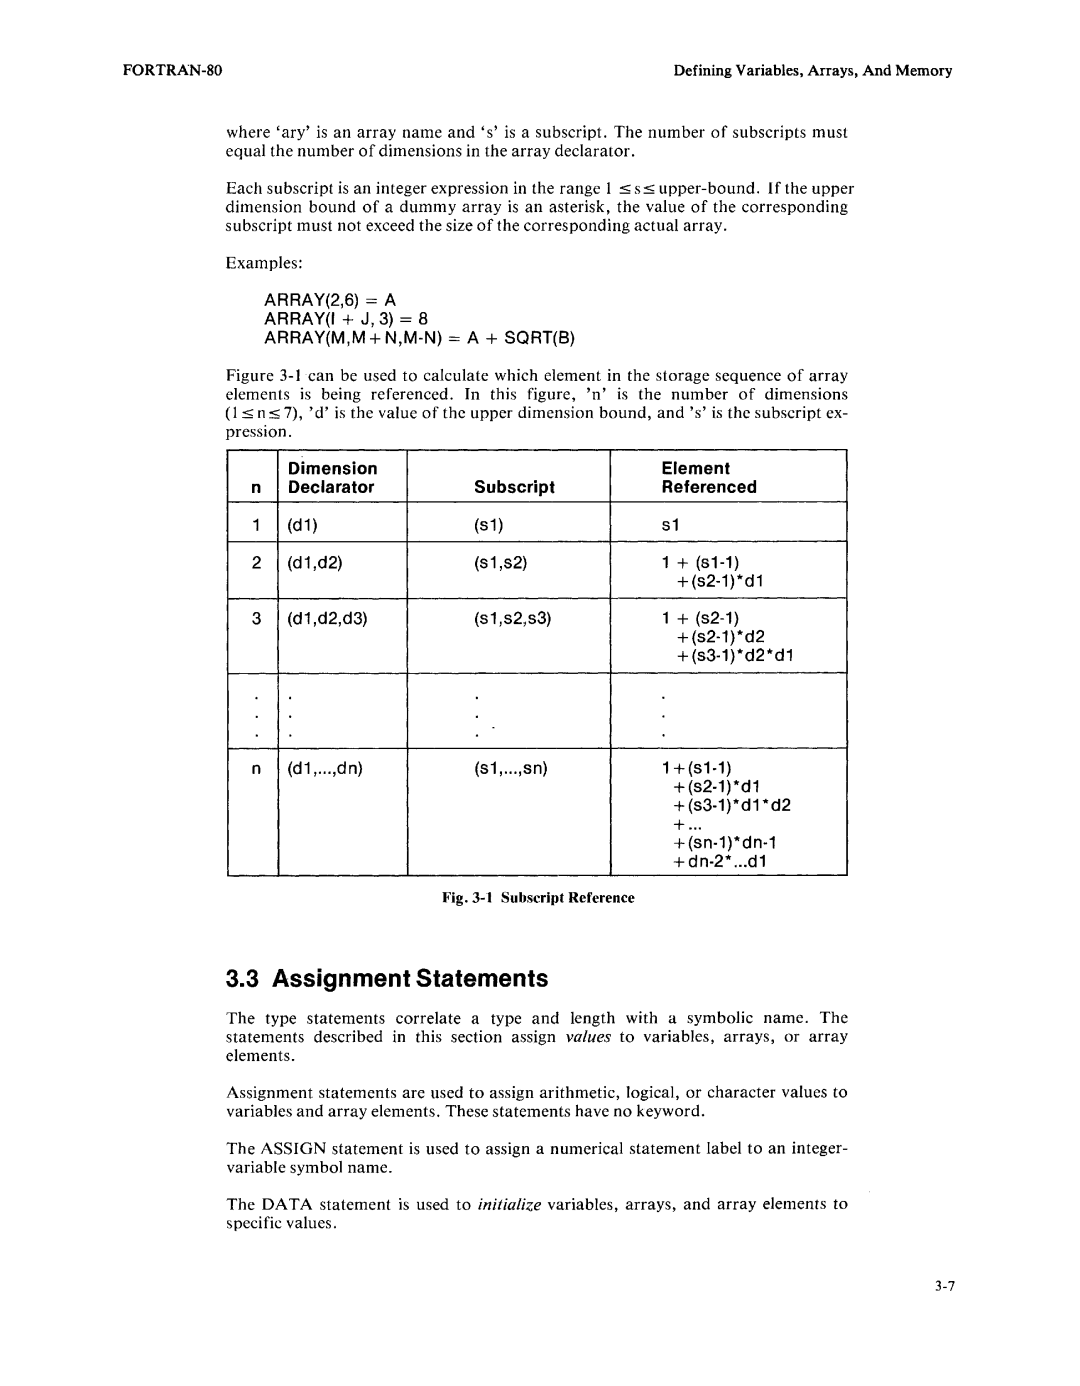 Intel fortran-80 manual Assignment Statements, Dimension, Element, Declarator, Subscript, Referenced 